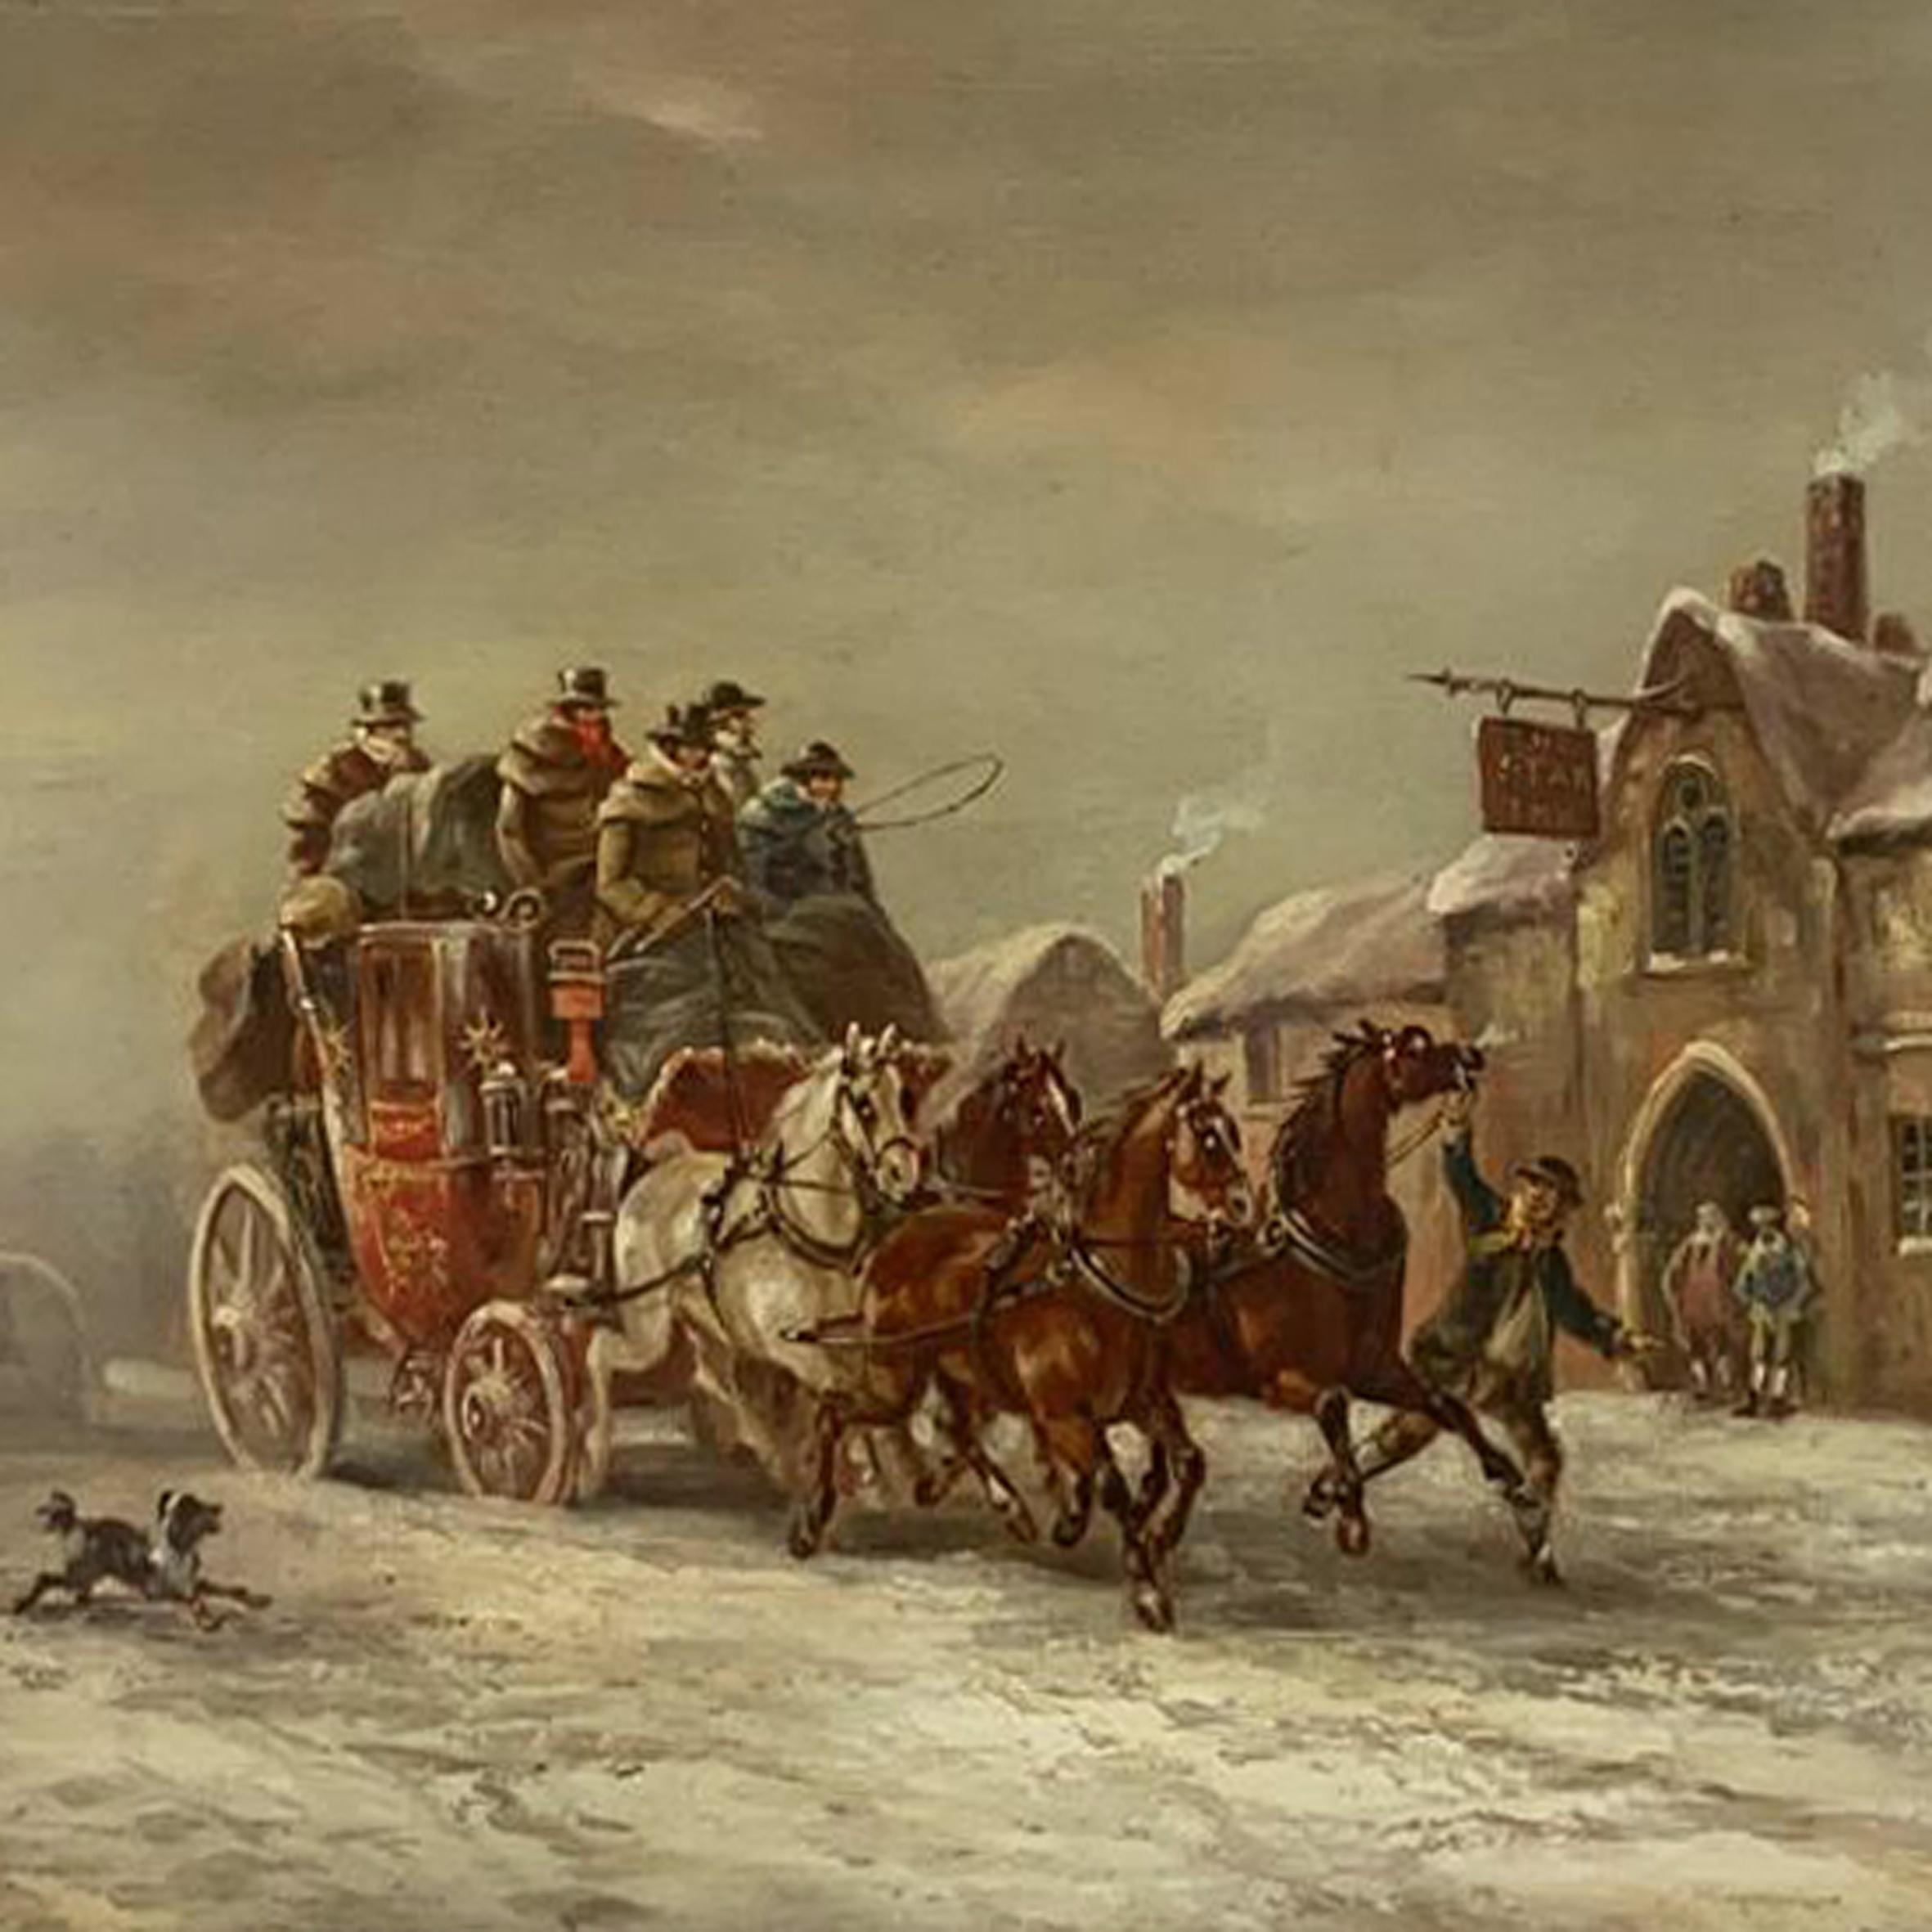 'A Coach in the Snow Outside an Inn'. 

Oil on canvas, signed and dated 'J.C. Maggs 1889 Bath'.

Framed in a water gilt gold leaf hollow frame with shot decoration and a linen slip.

John Charles Maggs (1819-1896) was a famous Bath coaching